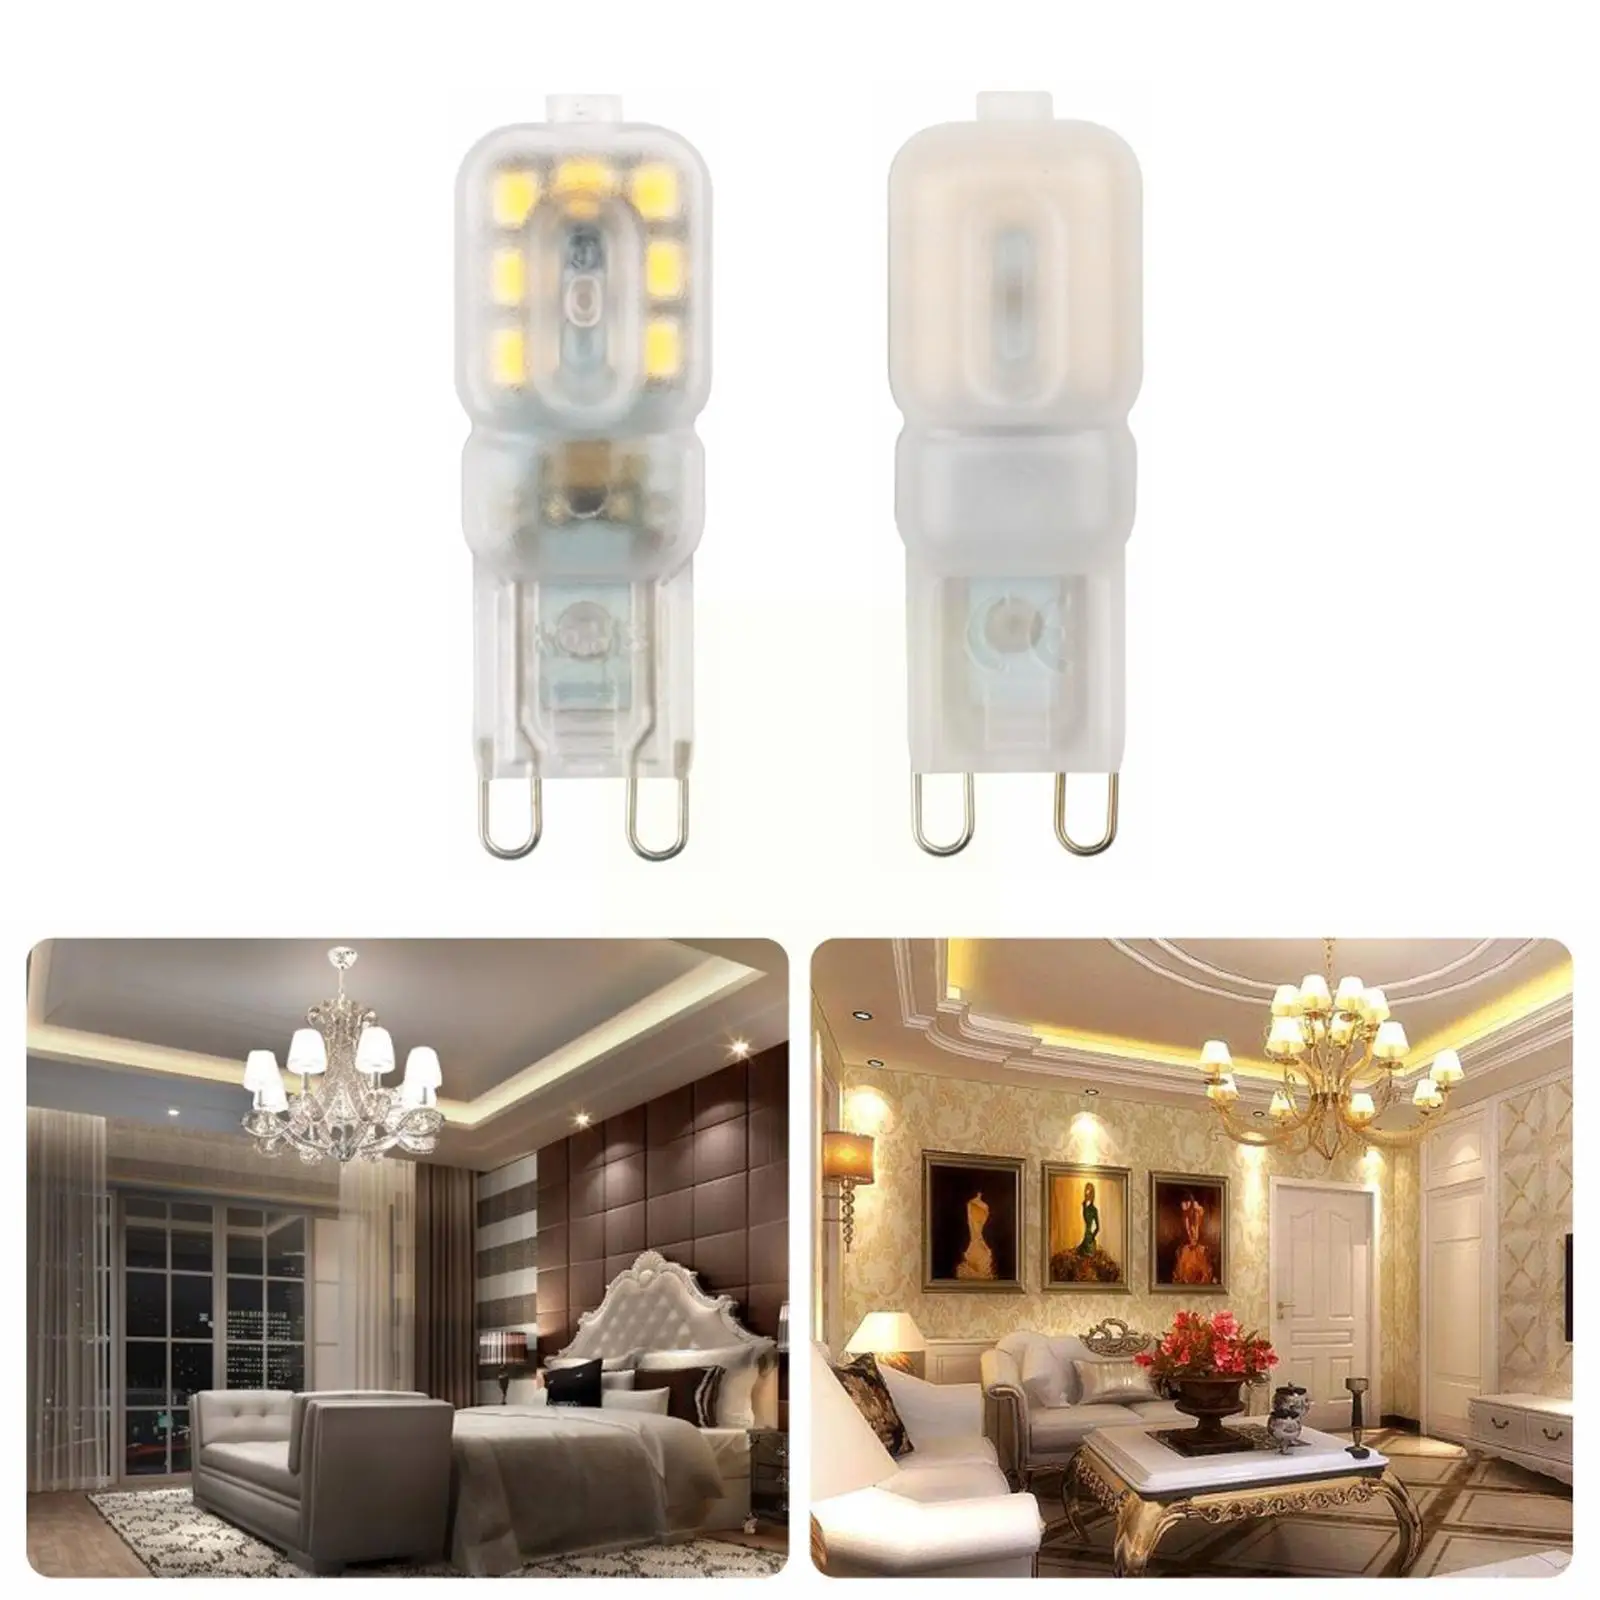 

G9 LED Light Dimmable Bulb 3W 5W SMD 2835 Spotlight For Crystal Chandelier Replace 20W 30W Halogen Lamp Lighting AC 220V C8P7